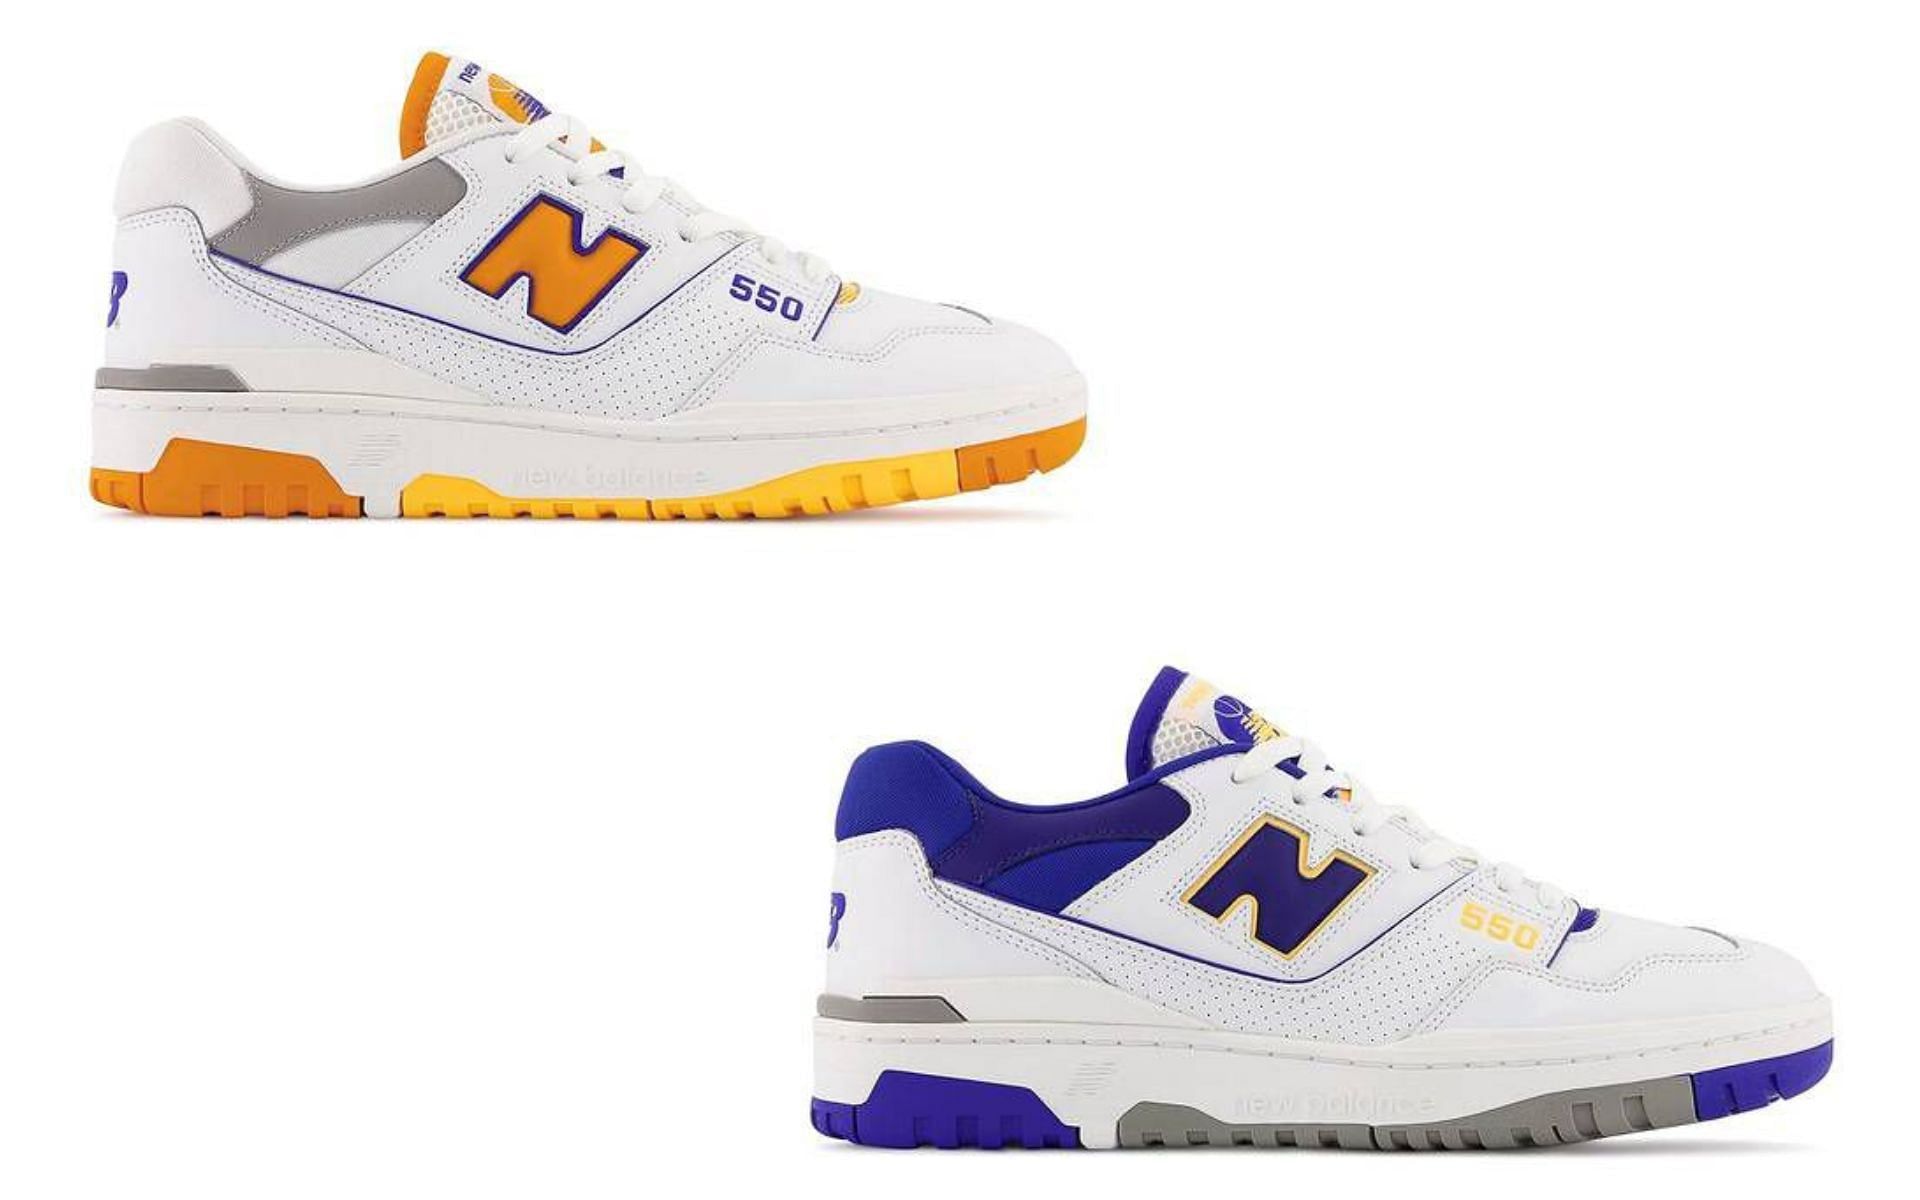 New Balance 550 Lakers-inspired sneaker collection (Image via New Balance)